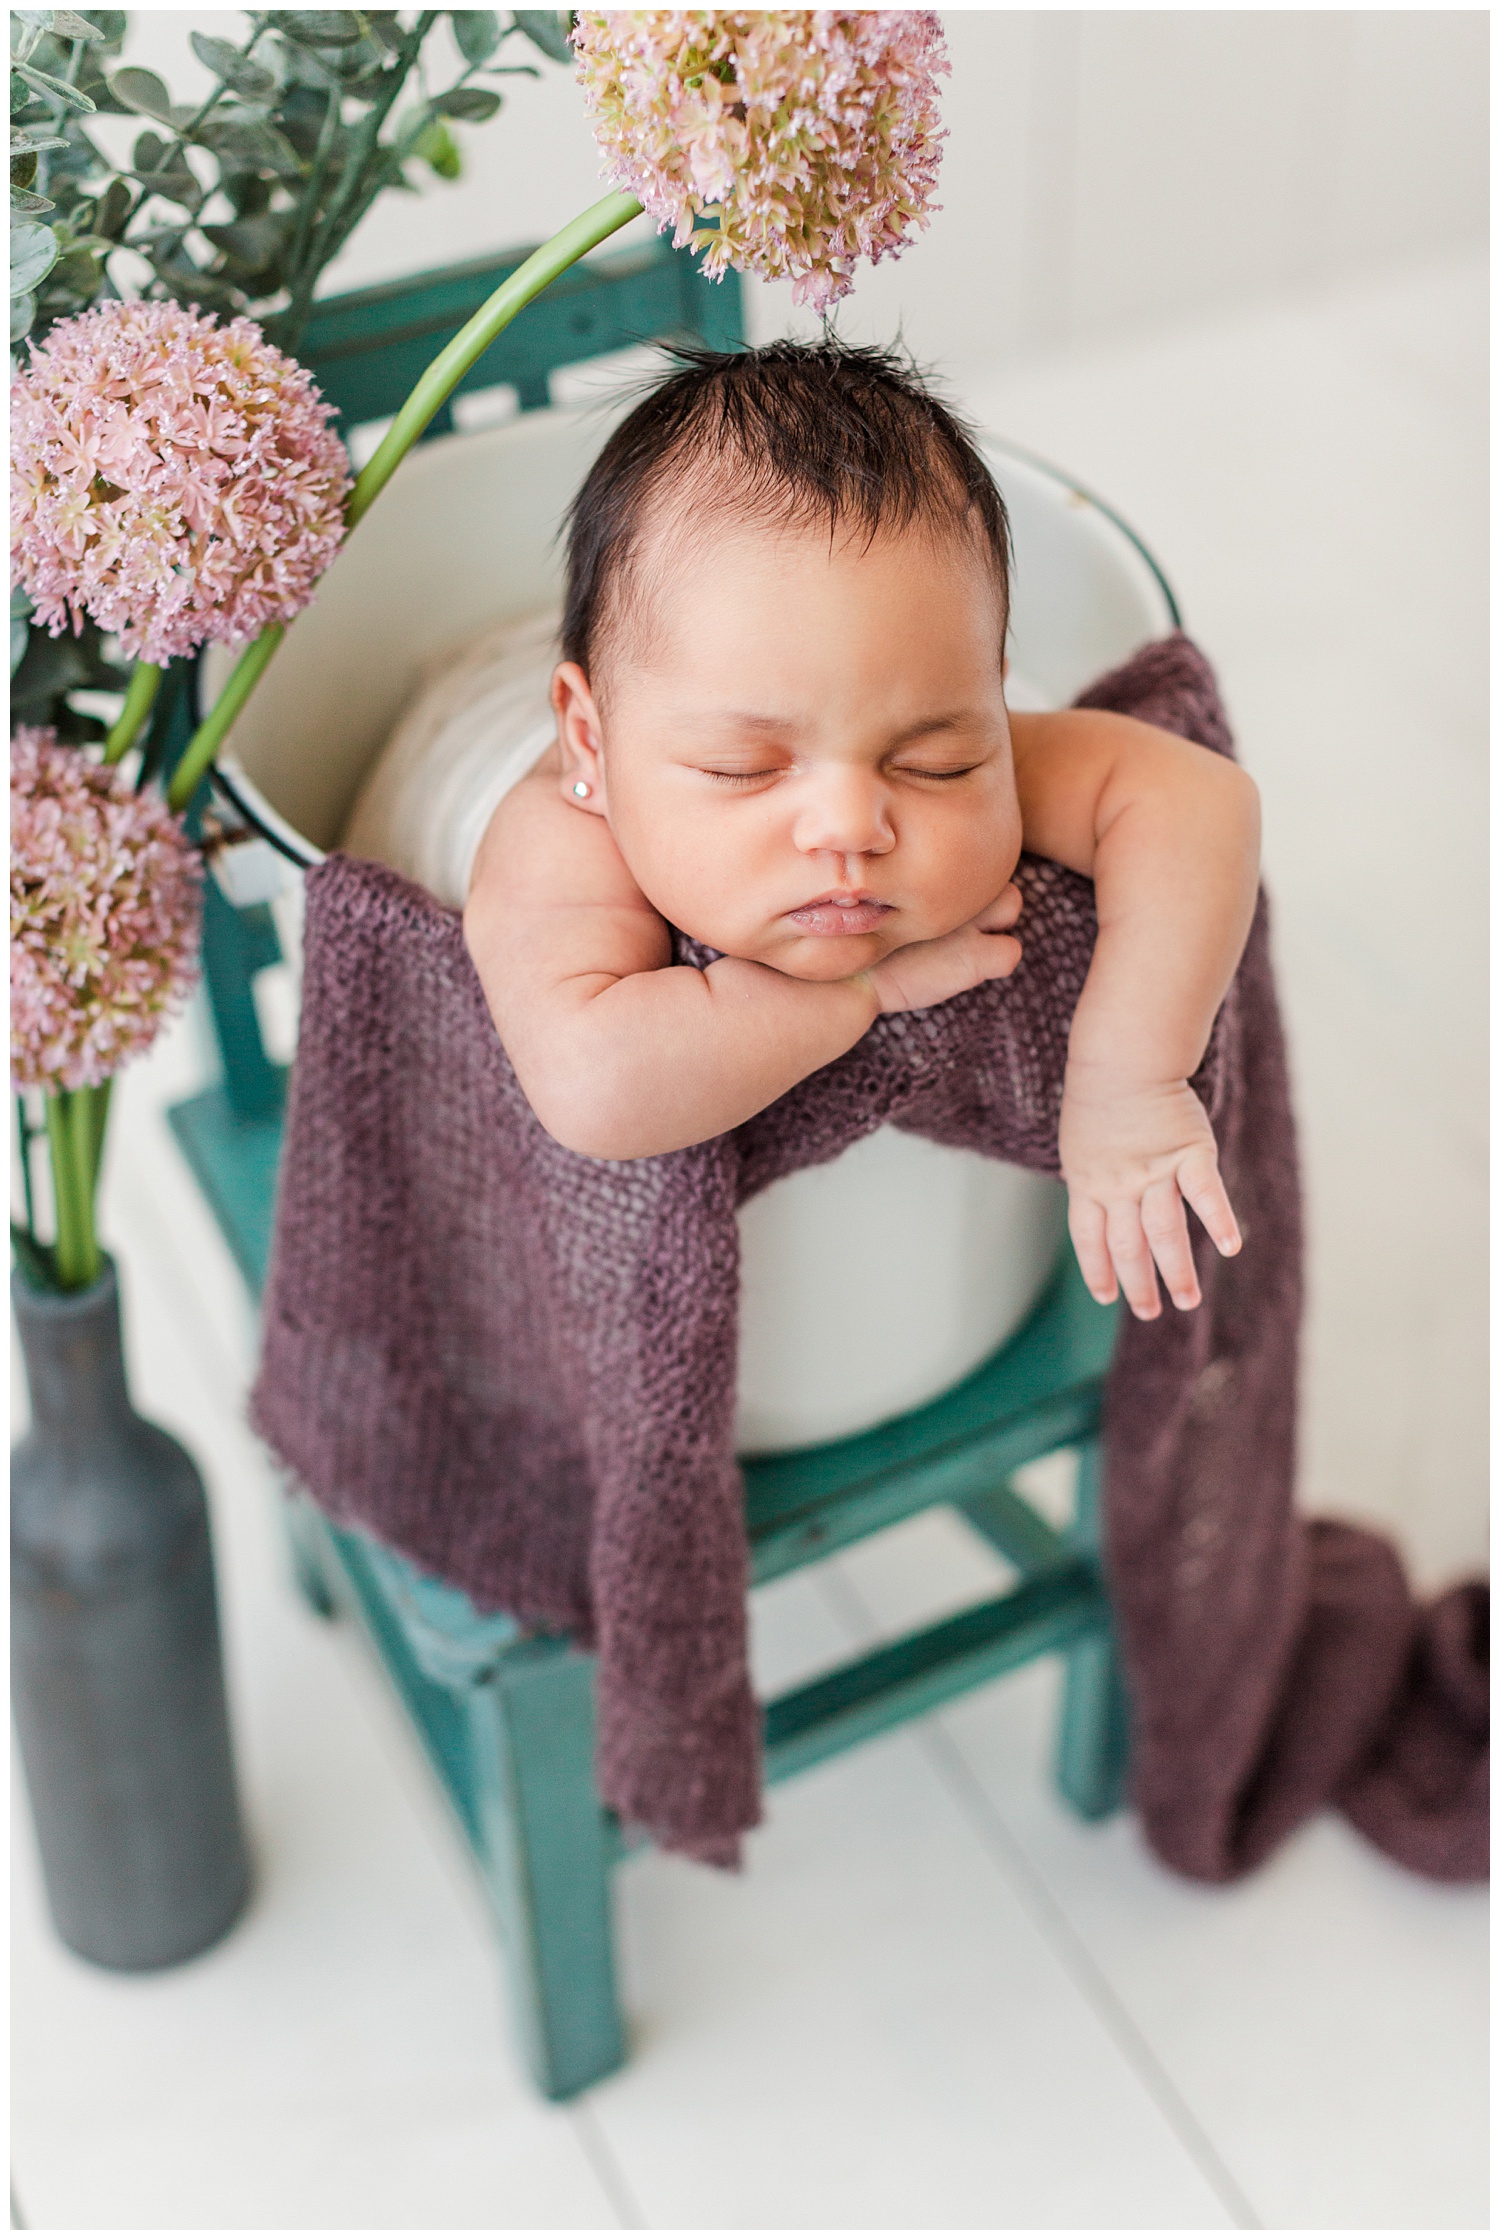 Newborn baby Alyssa snuggled in a white bucket resting on a teal chair with beautiful pink florals surrounding her | CB Studio